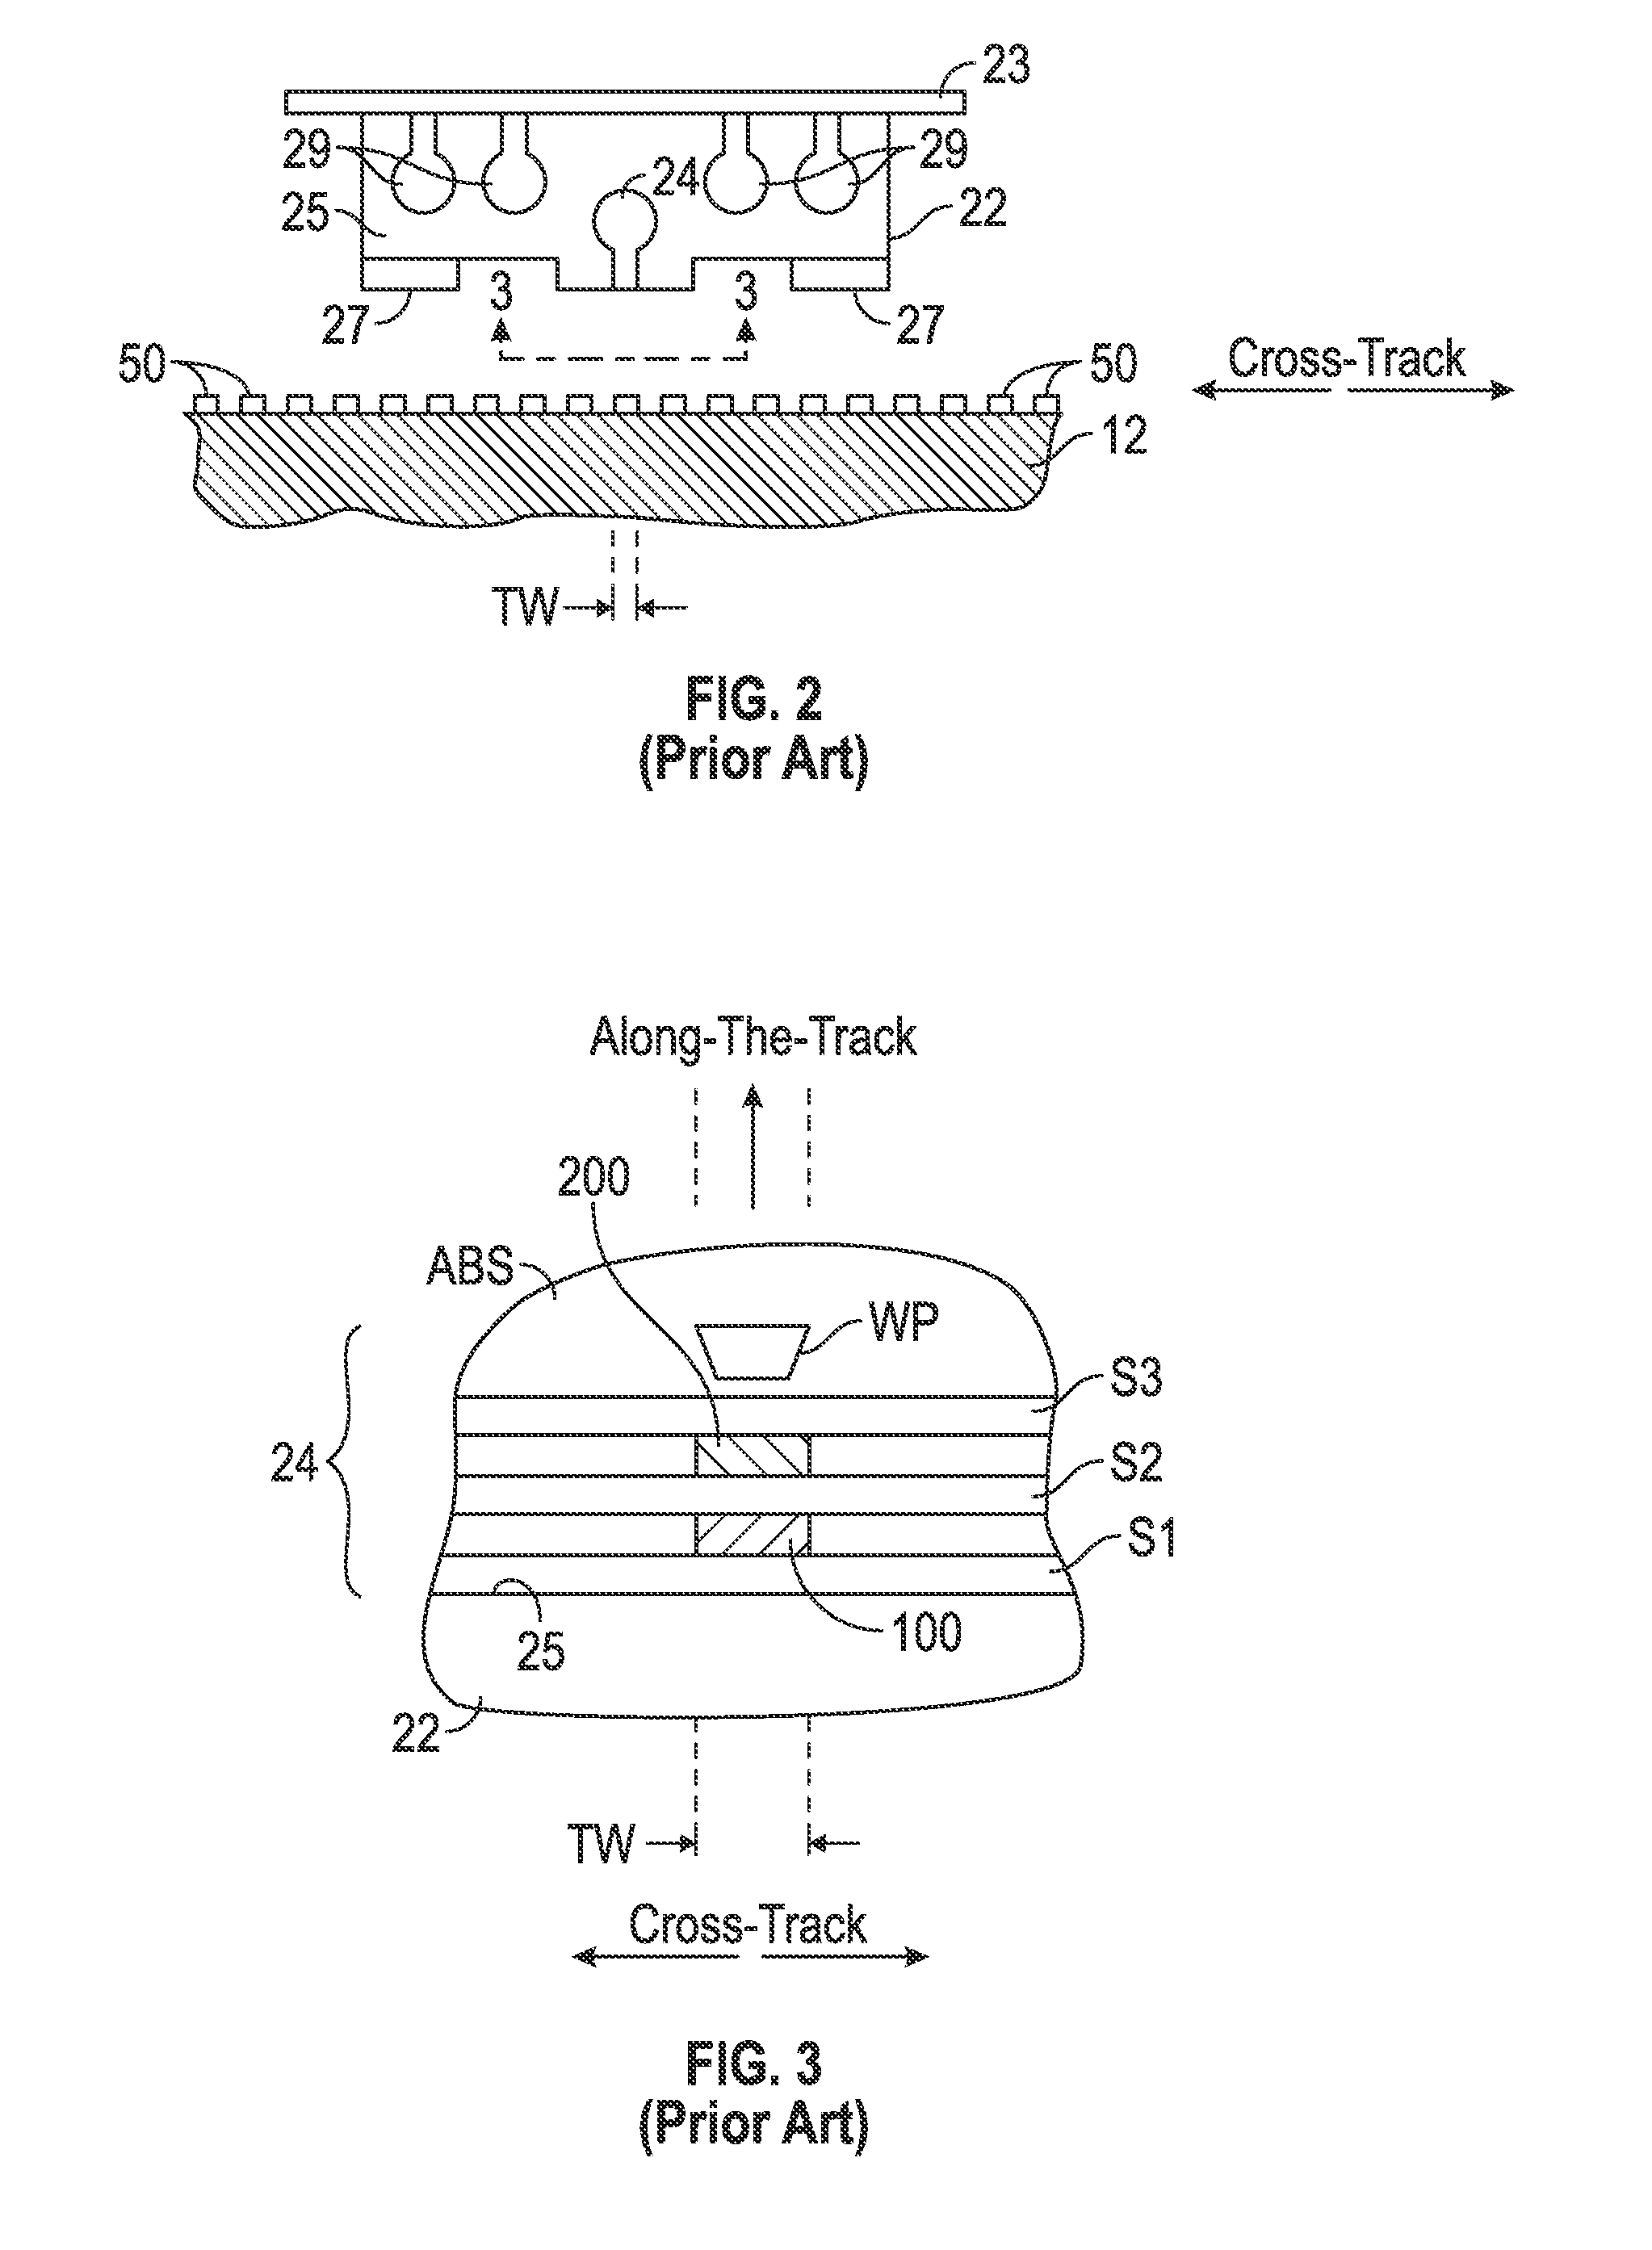 Current-perpendicular-to-the-plane (CPP) magnetoresistive (MR) sensor structure with stacked sensors for minimization of the effect of head skew